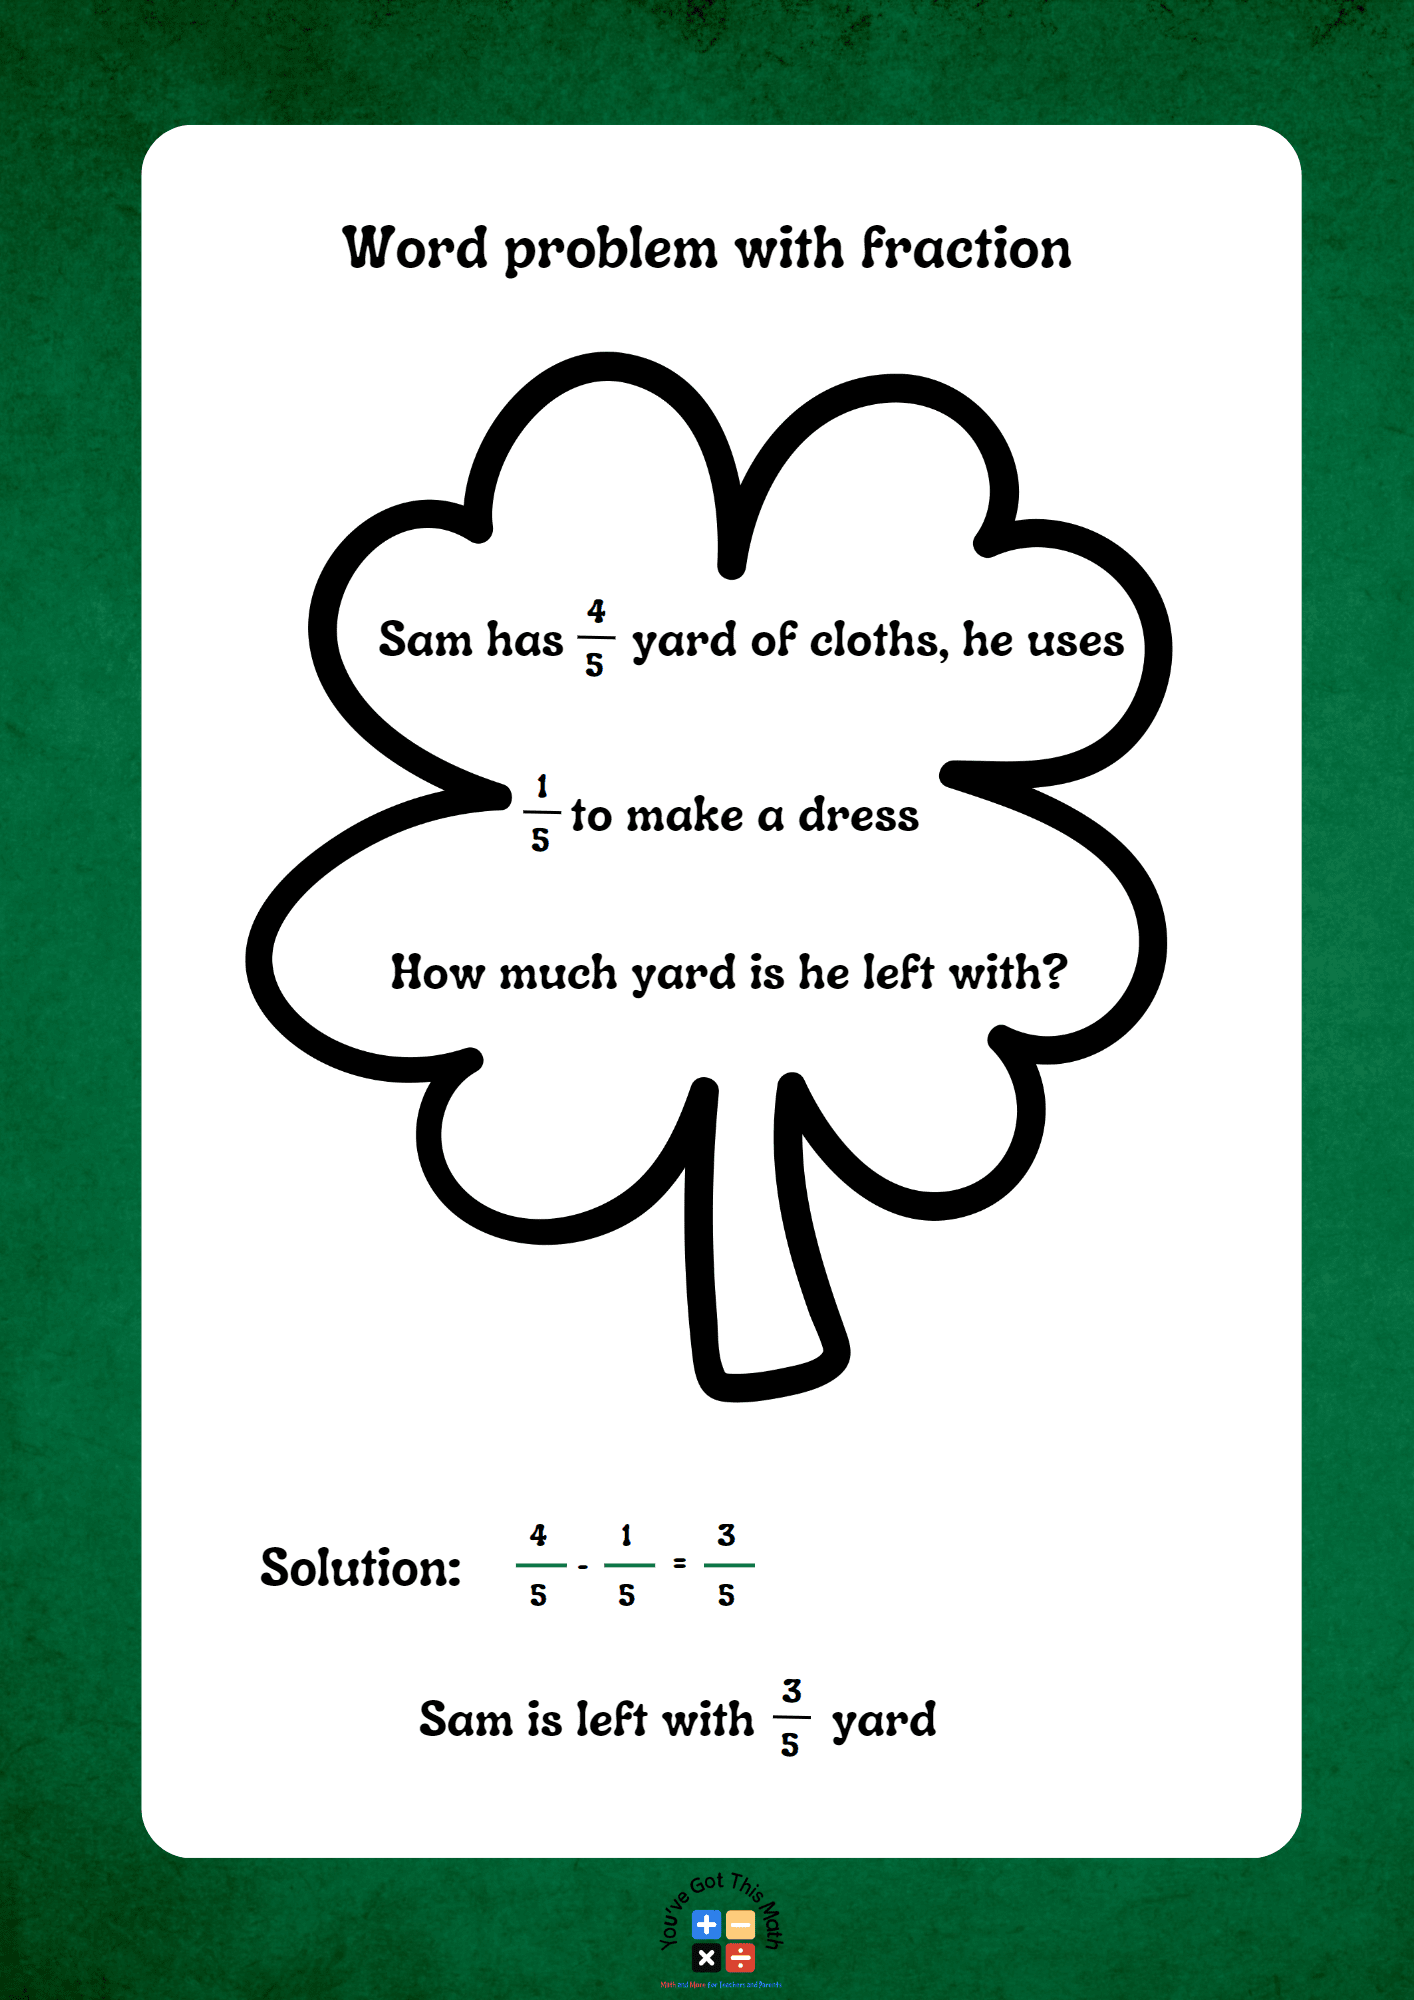 using word problem to learn St Patrick's Day Fraction Math